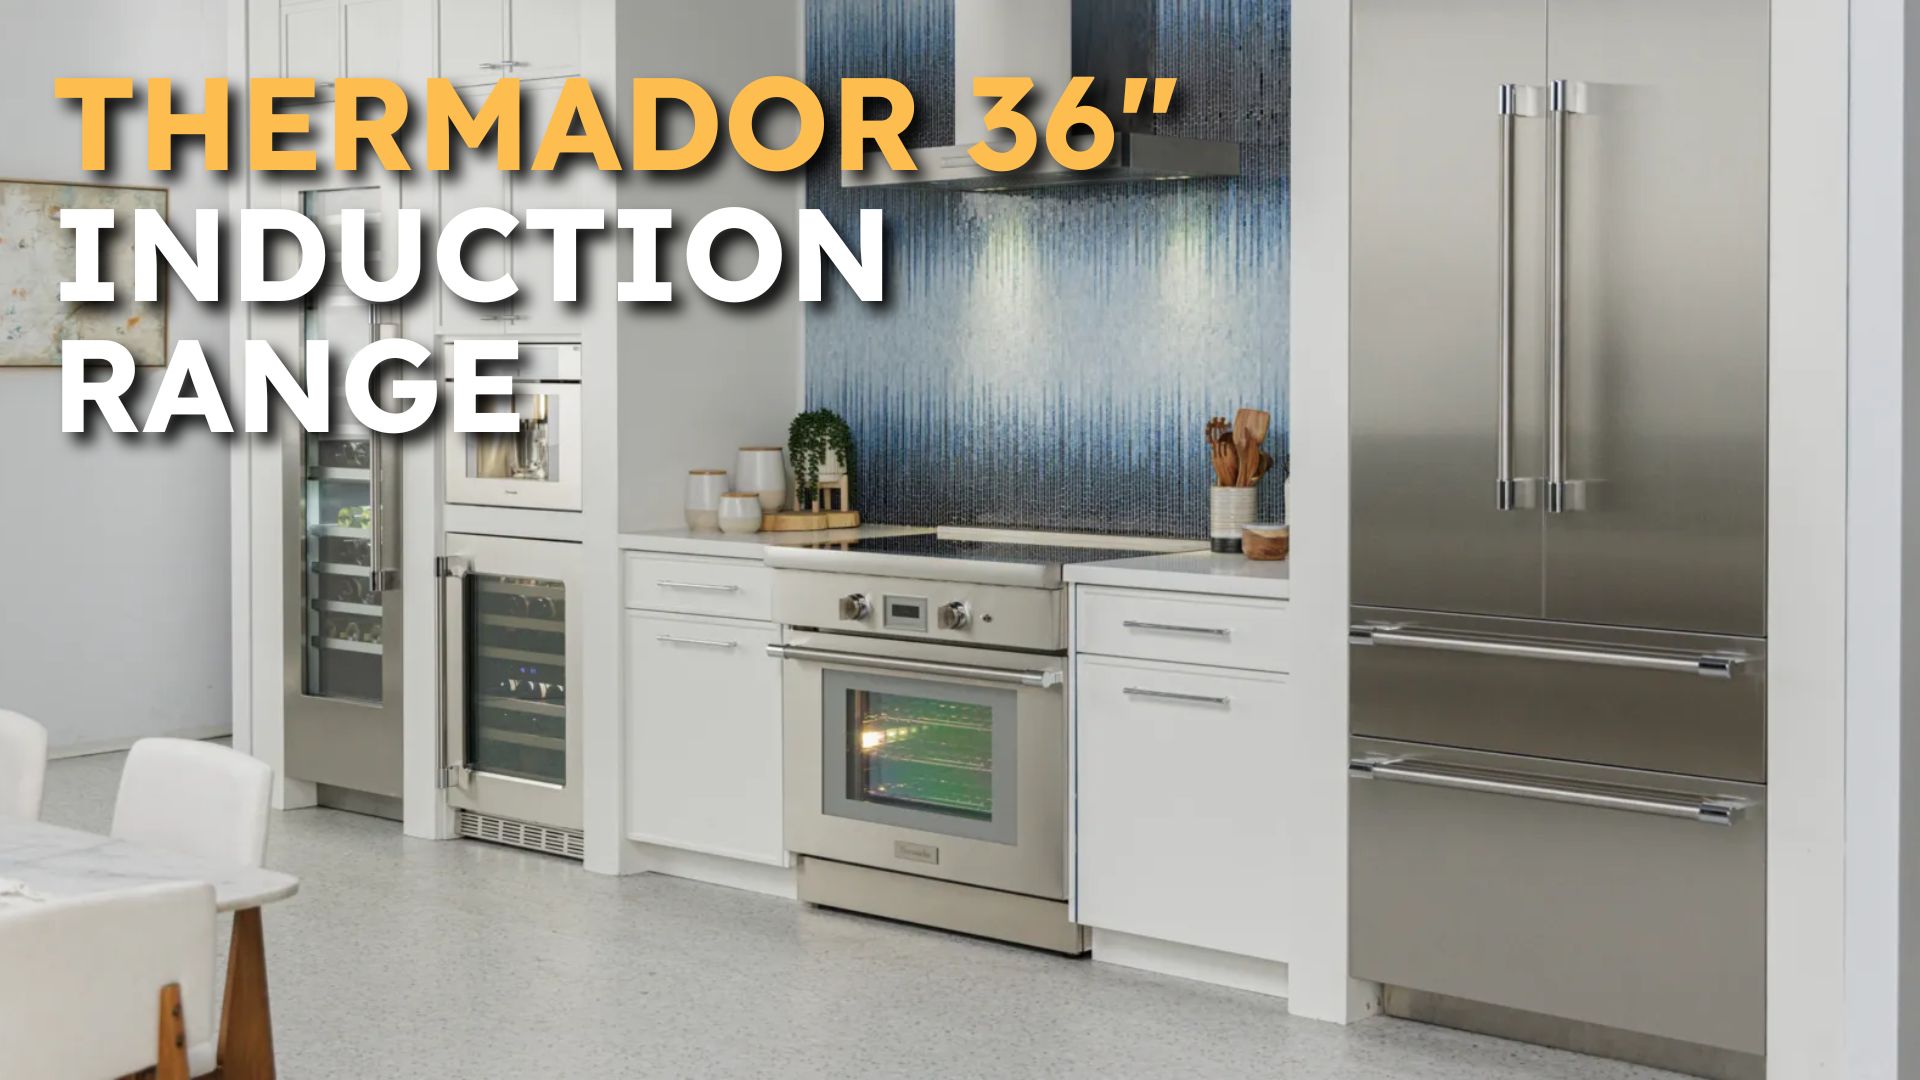 Thermador range lets you grill inside